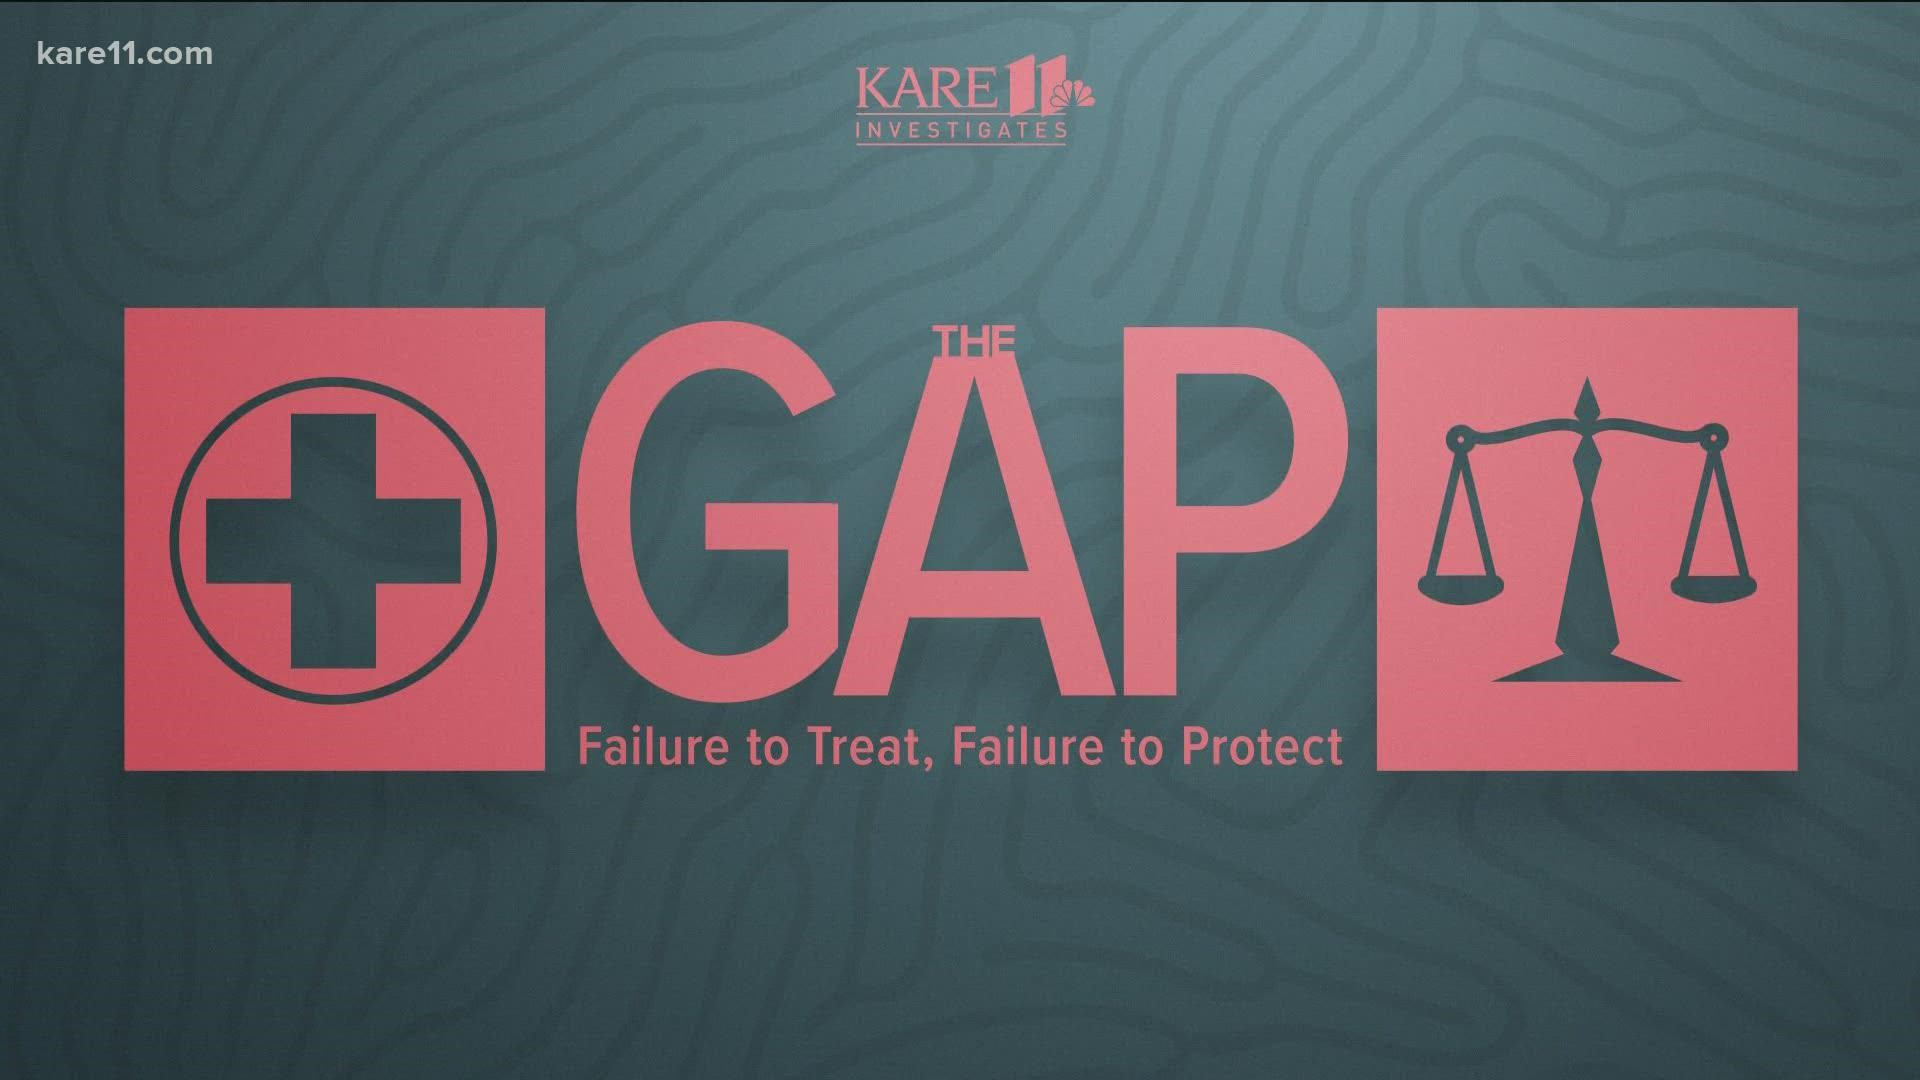 "This has got to stop," lawmaker says following KARE 11’s reports exposing deadly failures in the criminal justice and mental health care systems.